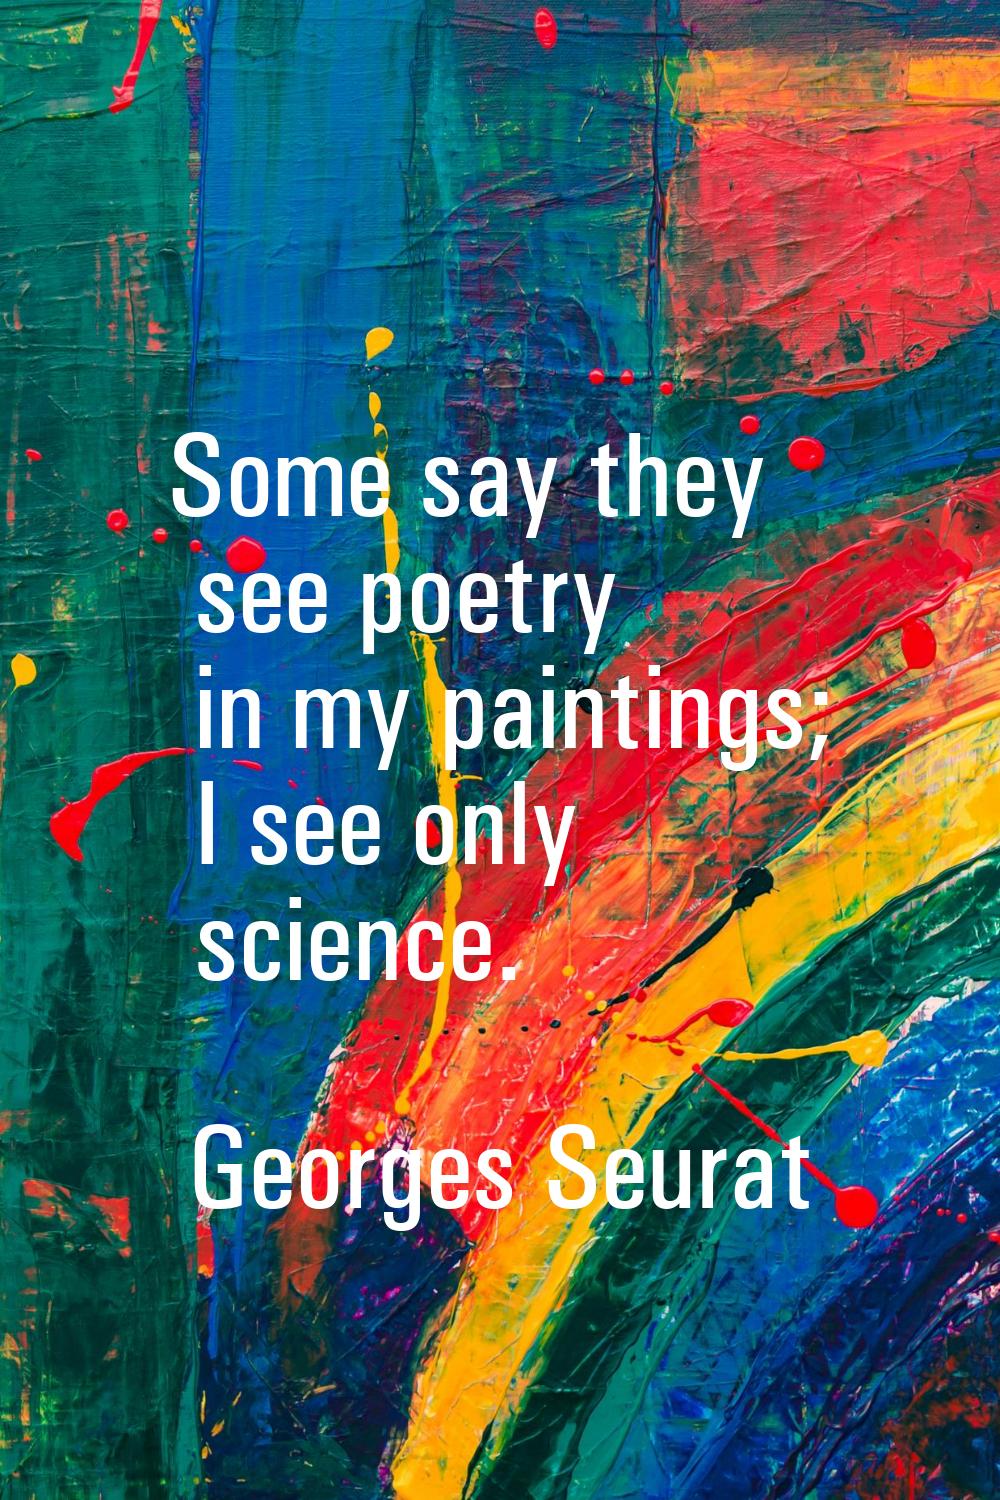 Some say they see poetry in my paintings; I see only science.